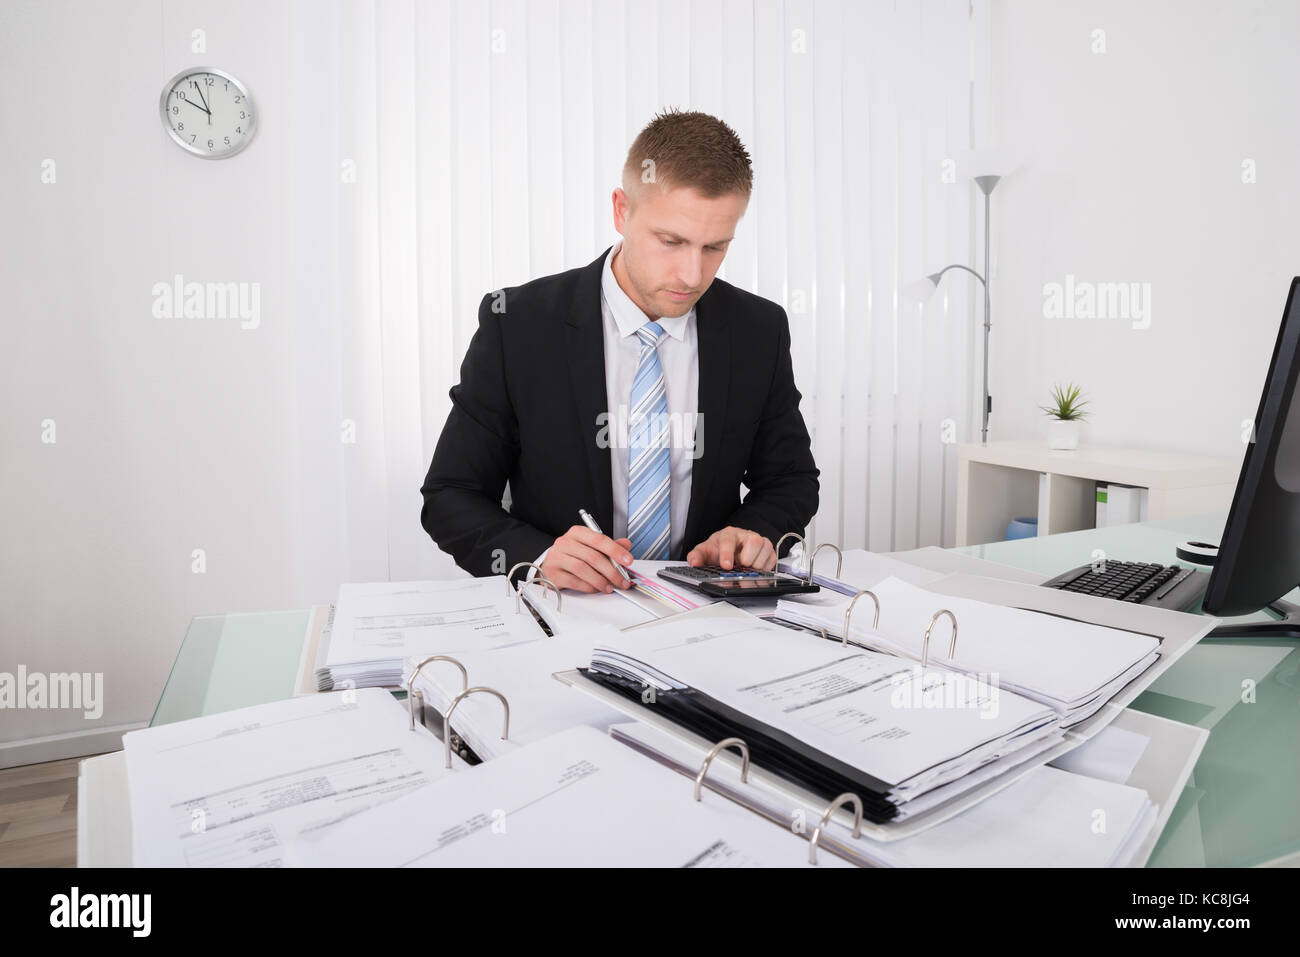 Young Businessman Calculating Tax At Office Desk Stock Photo